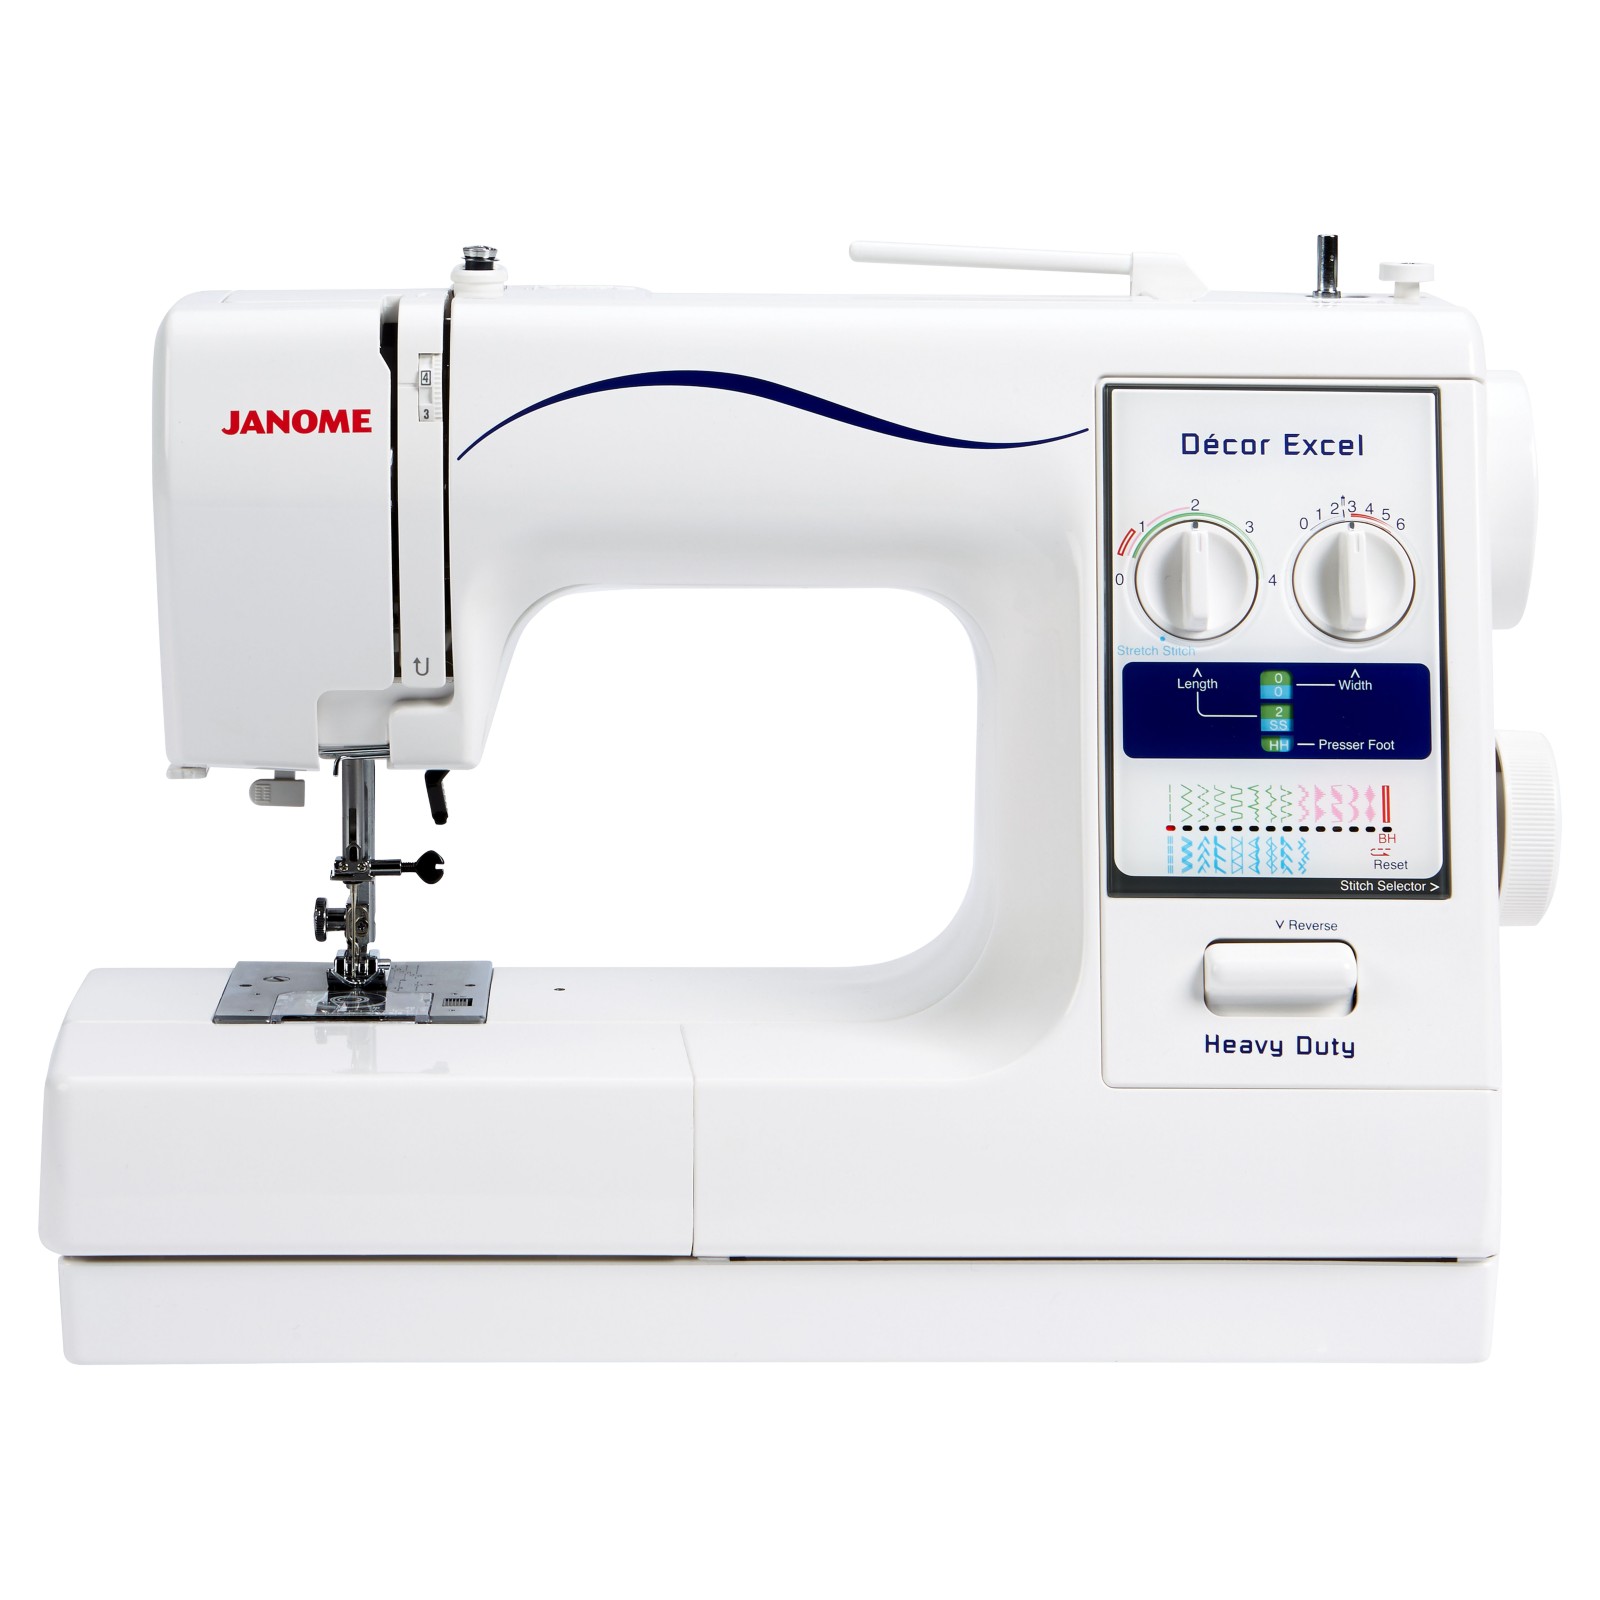 For Janome Dmx300 Deluxe Sewing Machine Product No Longer Available